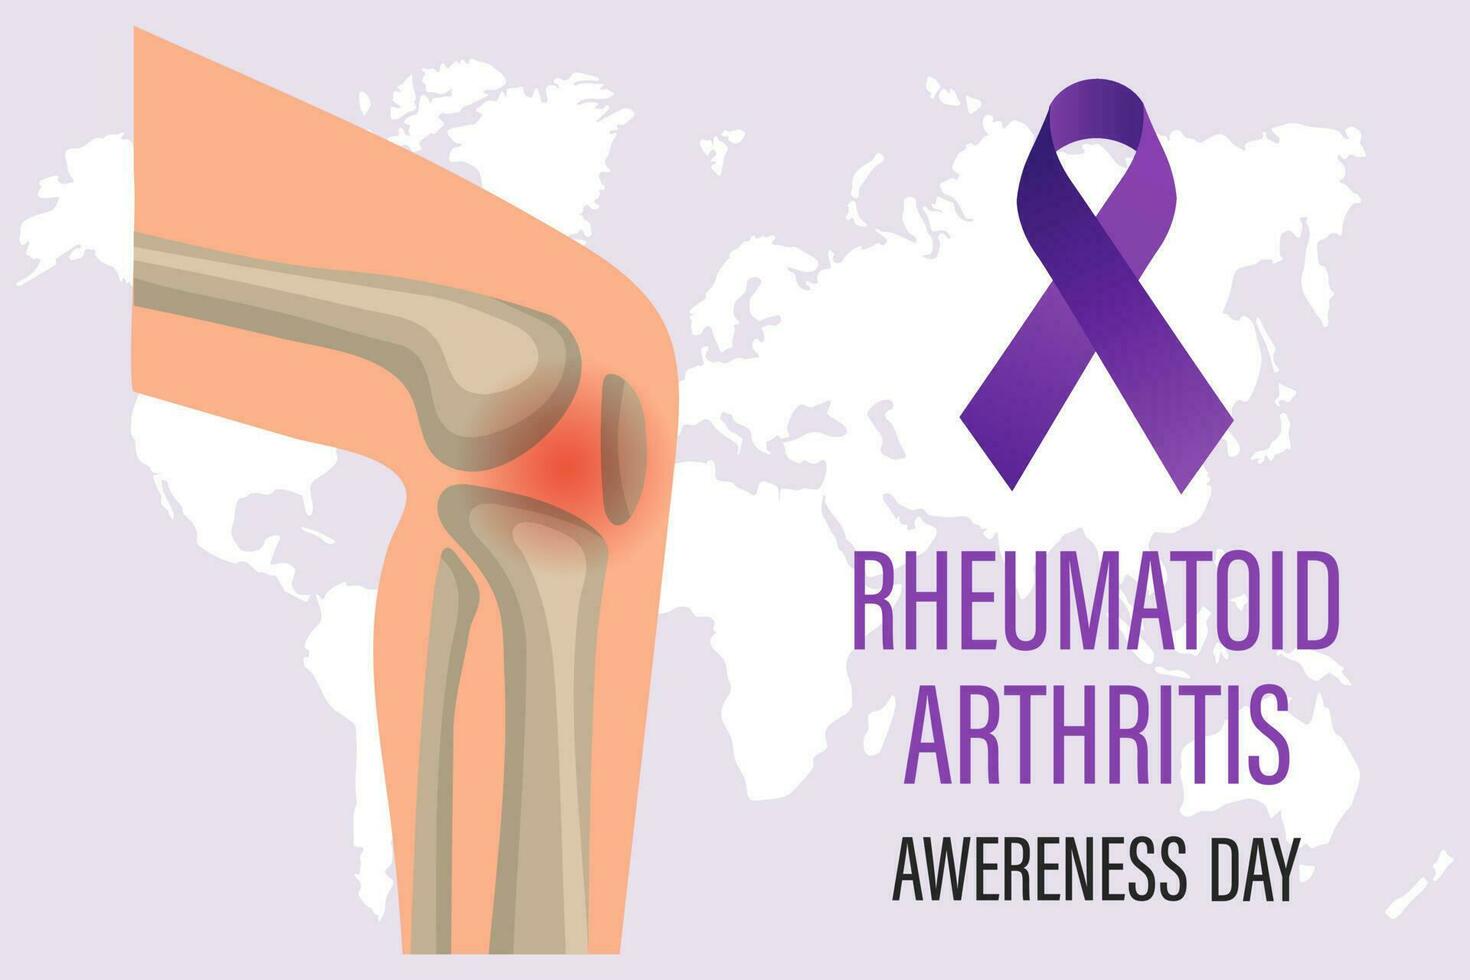 Rheumatoid Arthritis Awareness Day banner, 2 February. A purple ribbon and a man's knee joint. Medical concept. Poster, banner vector